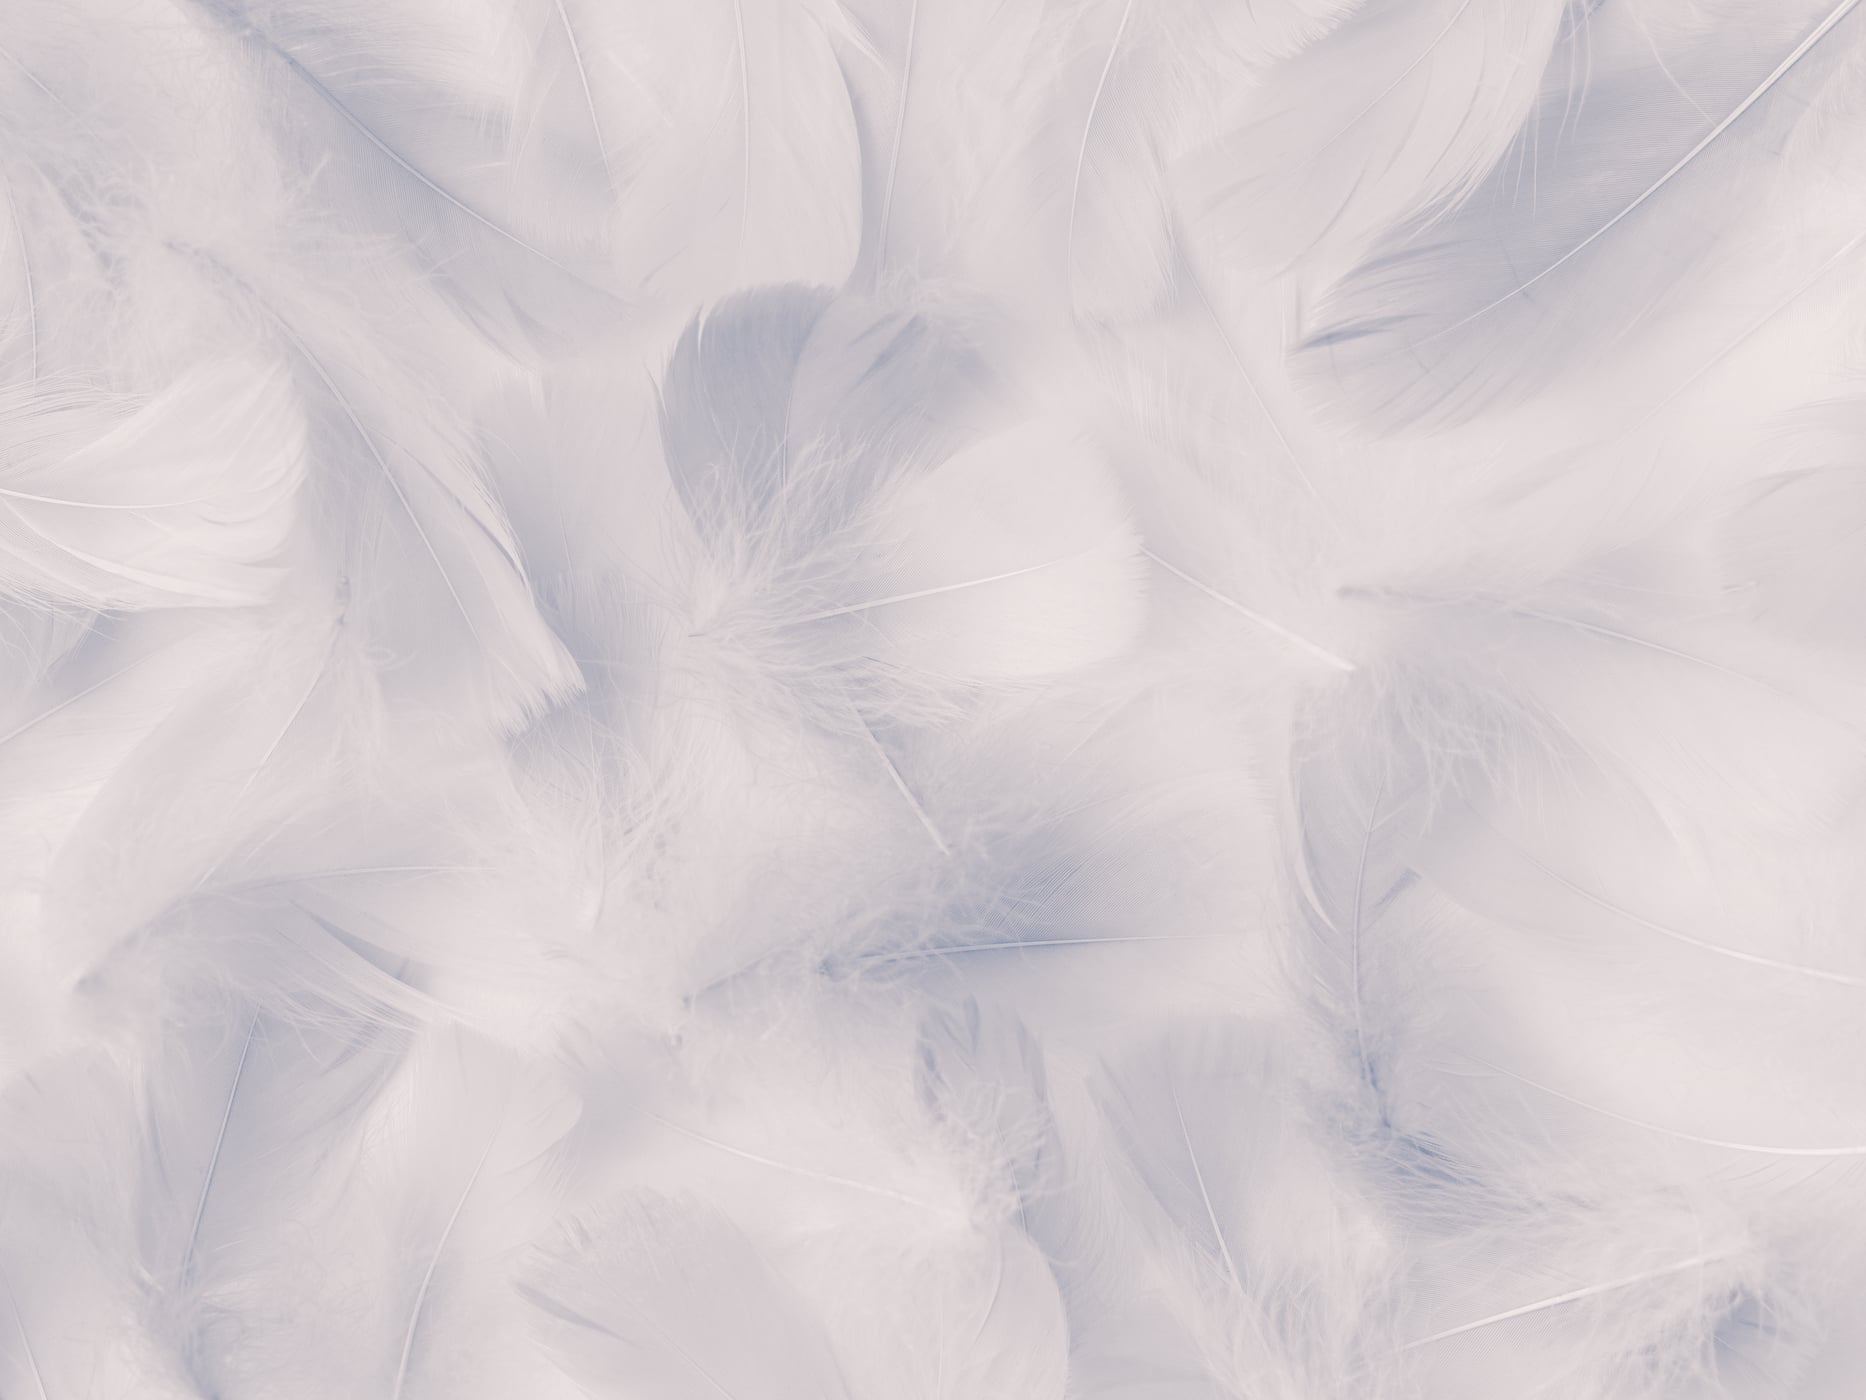 407 megapixels! A very high resolution, large-format VAST photo print of soft feathers; abstract photograph created by Assaf Frank.